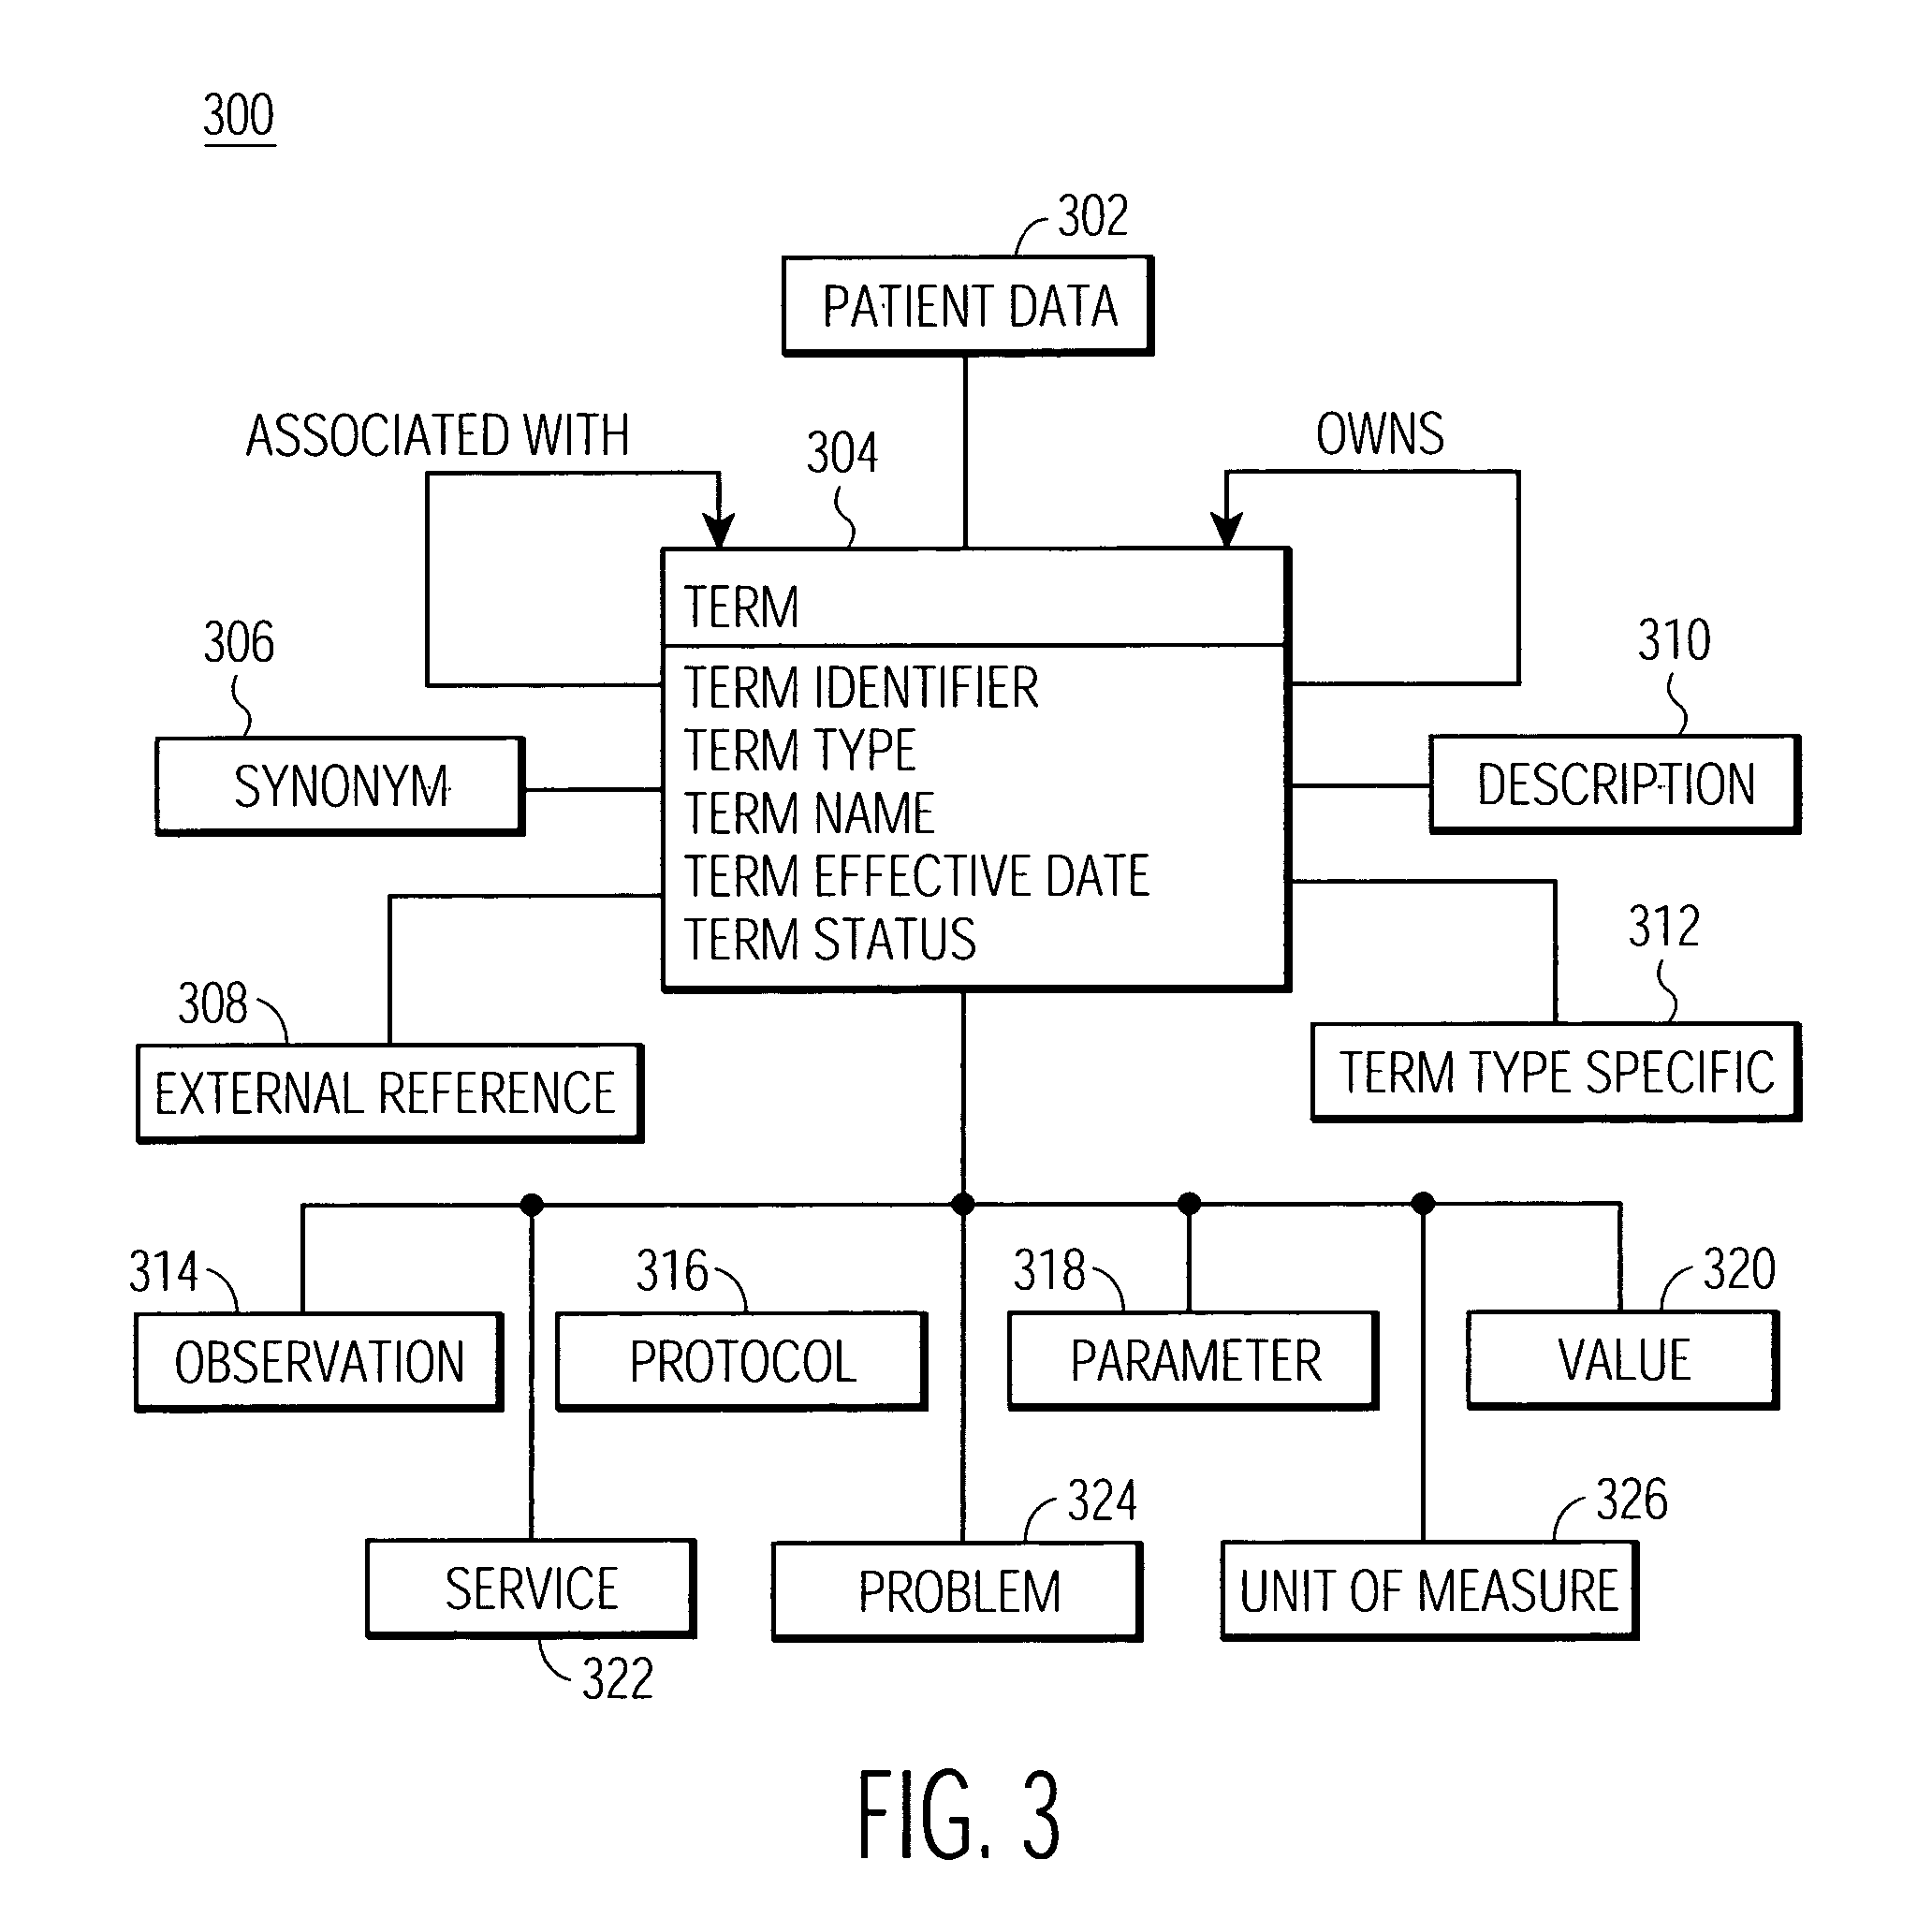 System for managing healthcare data including genomic and other patient specific information